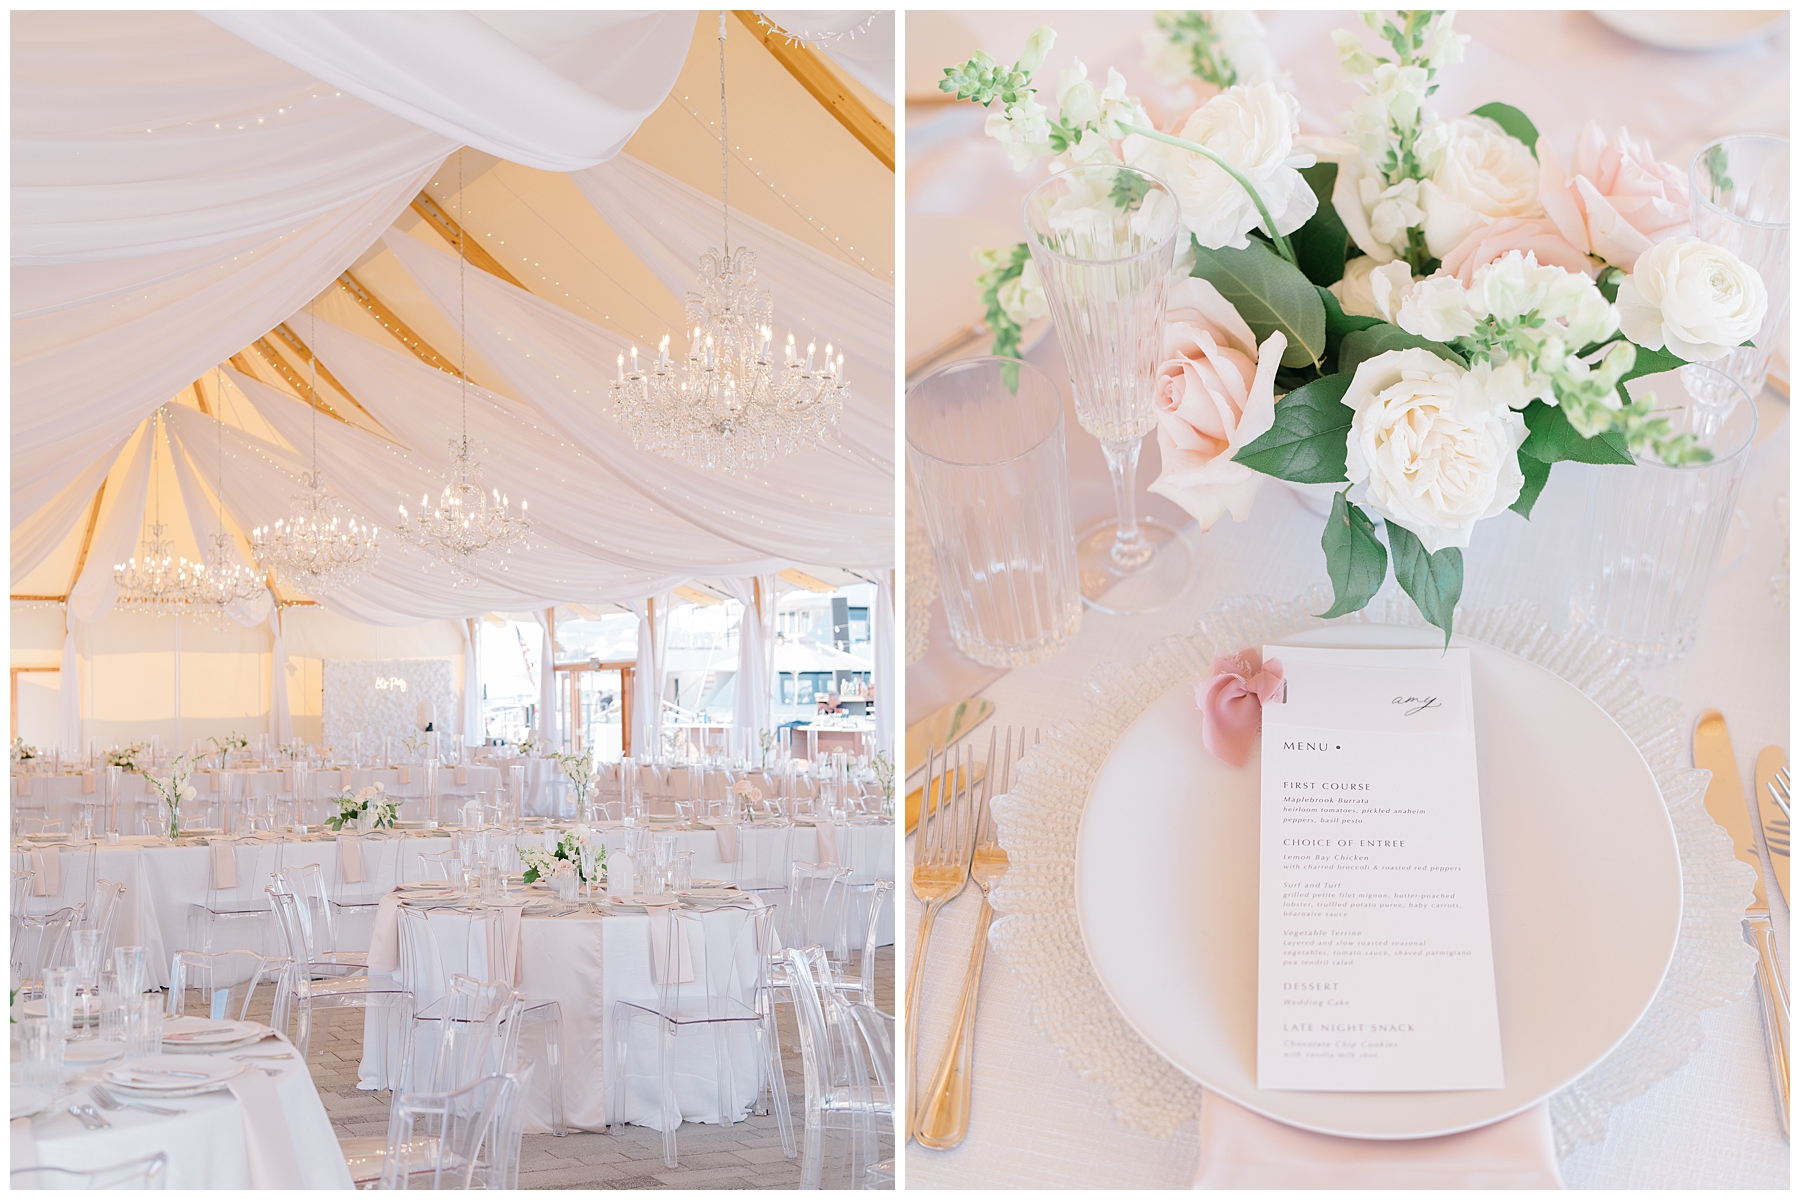 wedding reception florals in classic, blush colors